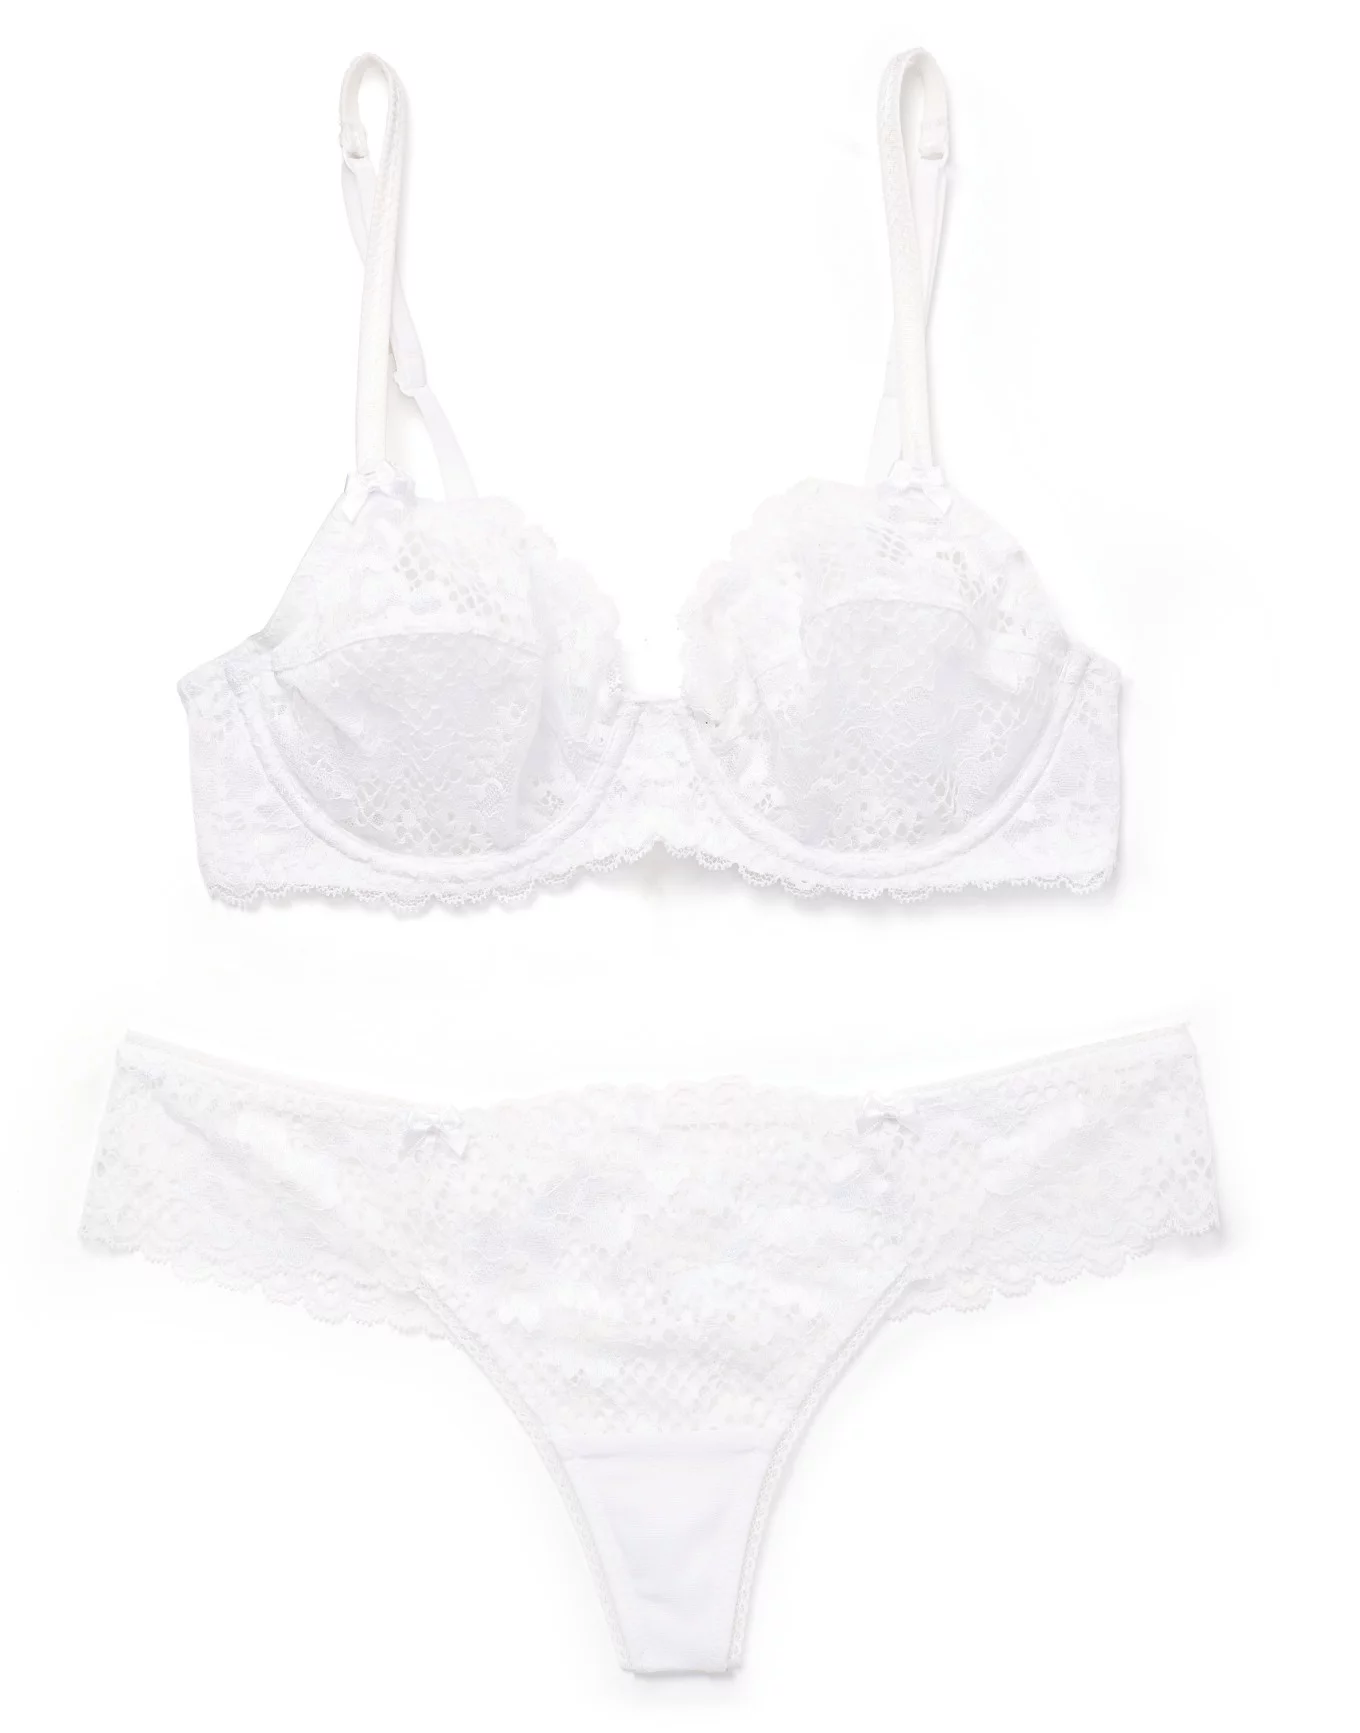 Cinthia White Unlined Full Coverage, 30A-38D